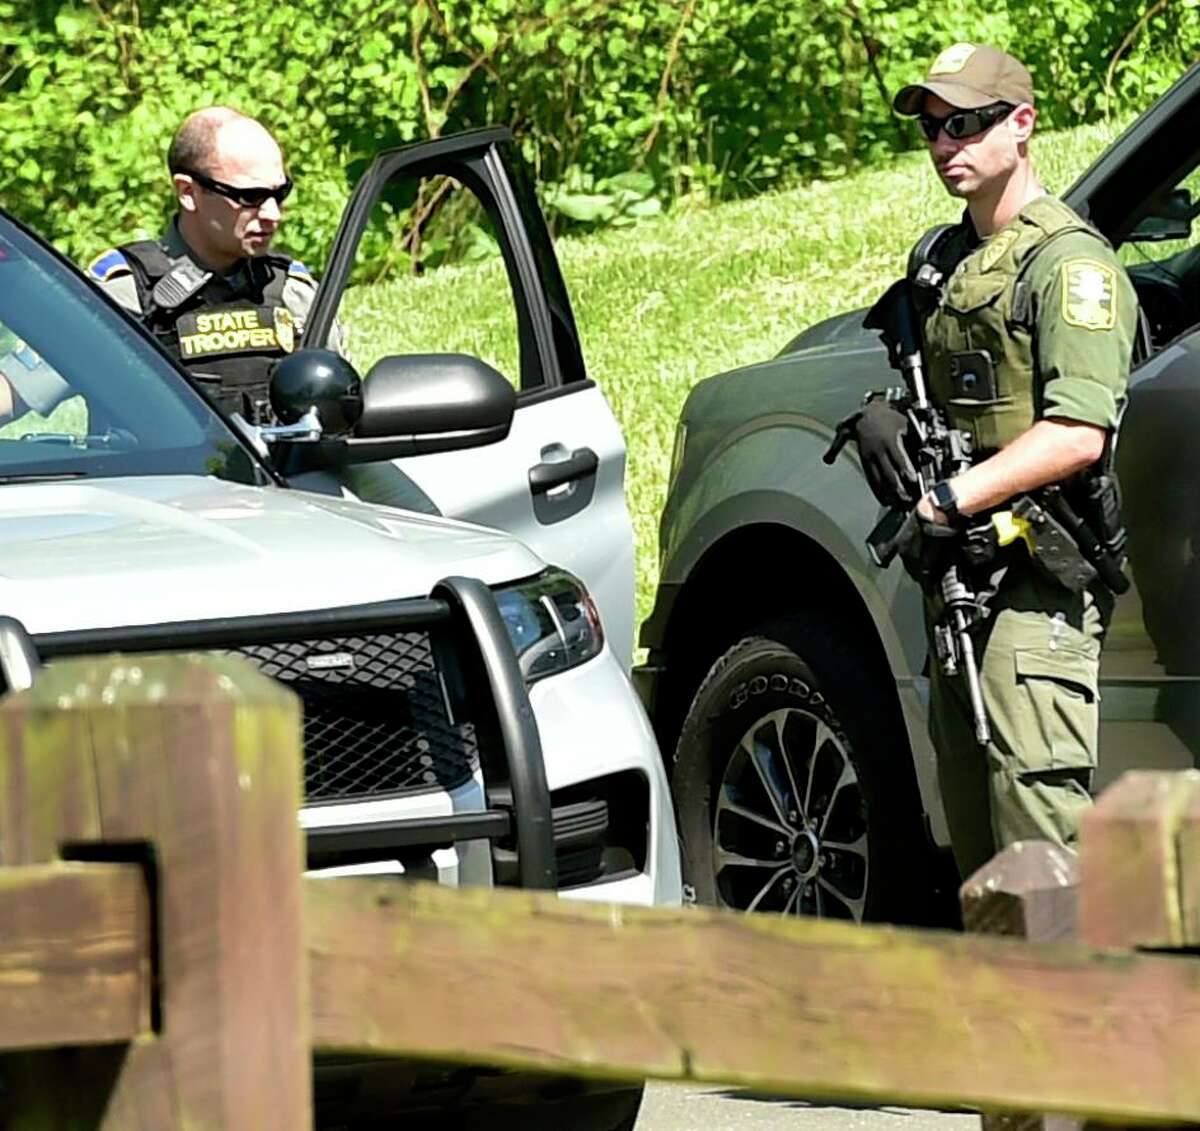 A Connecticut Department of Energy and Environmantal Protection officer, right, talks with a state trooper Sunday during the search for suspected murderer Peter Manfredonia, 23, described as armed and dangerous Sunday morning at Osbornedale State Park in Derby after a stolen vehicle linked to the suspect was found on Hawthorne Avenue near Cullens Hill Road in Derby. The area borders Osbornedale State Park.The discovery launched an extensive search of the park and on local streets and in neighborhoods near Osbornedale and Roosevelt Drive where law enforcement secured another crime scene thought to be connected to Manfredonia. State Police said Manfredonia is believed to be armed with pistol and long guns. Manfredonia is wanted in a homicide and serious assault in northeastern Connecticut.